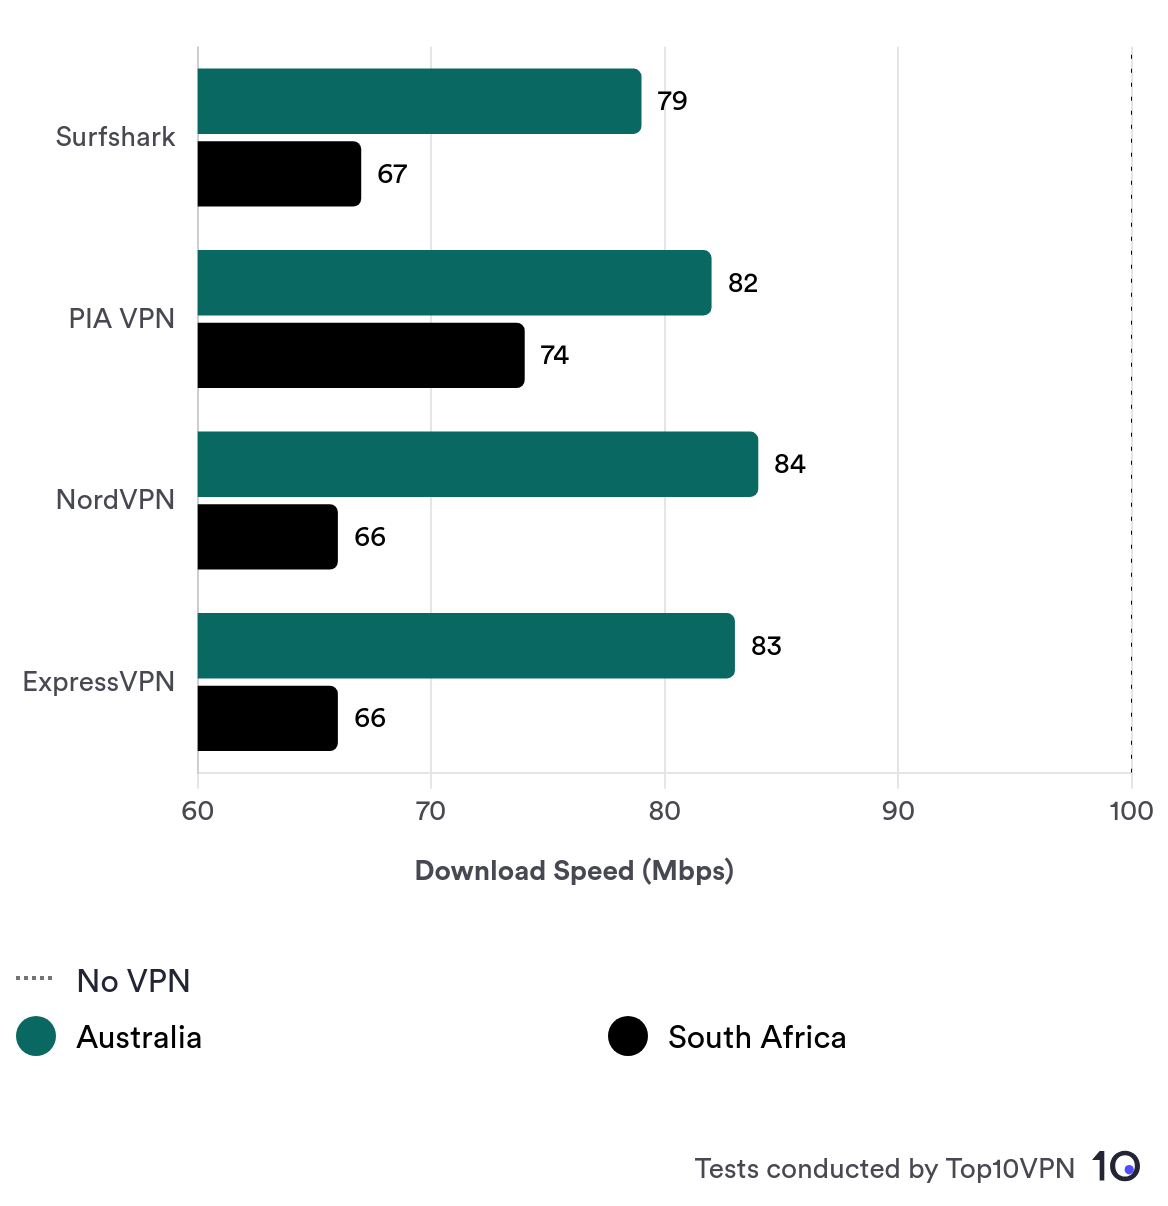 Long-distance connections to Australia and South Africa compared when using Surfshark, Private Internet Access, NordVPN, and ExpressVPN.